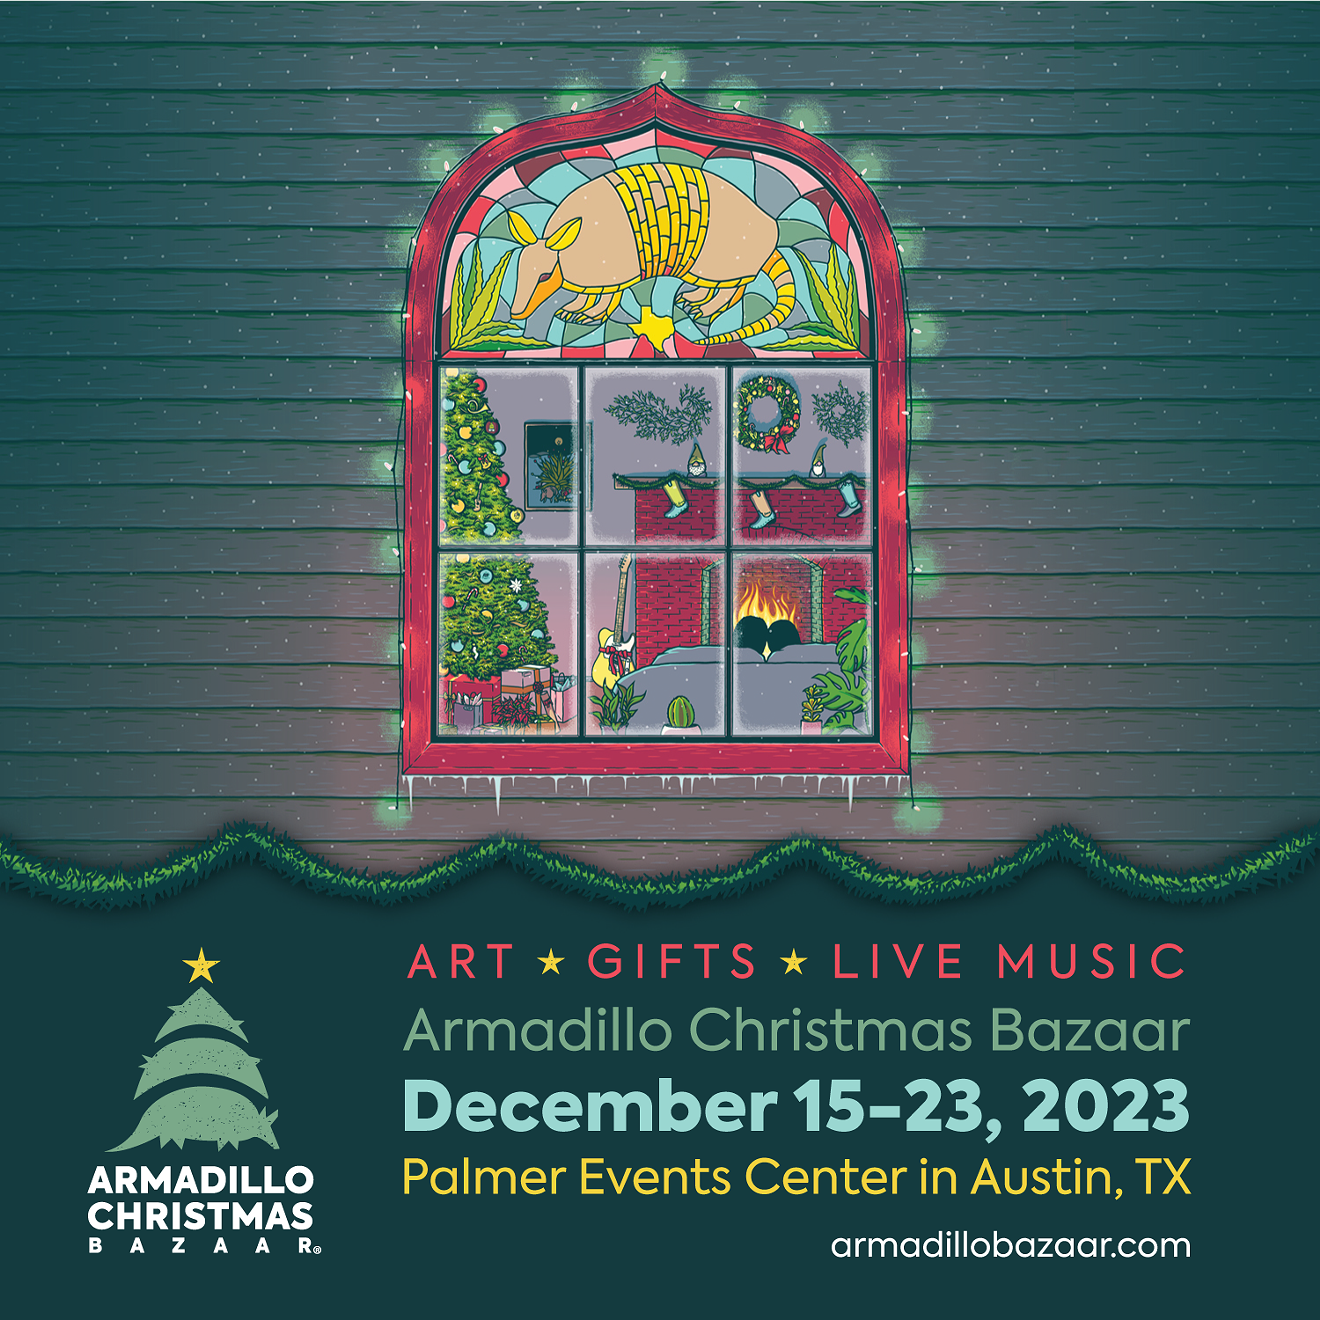 The Armadillo Christmas Bazaar announces dates for this year, Dec. 15 - 23, 2023 at the Palmer Events Center